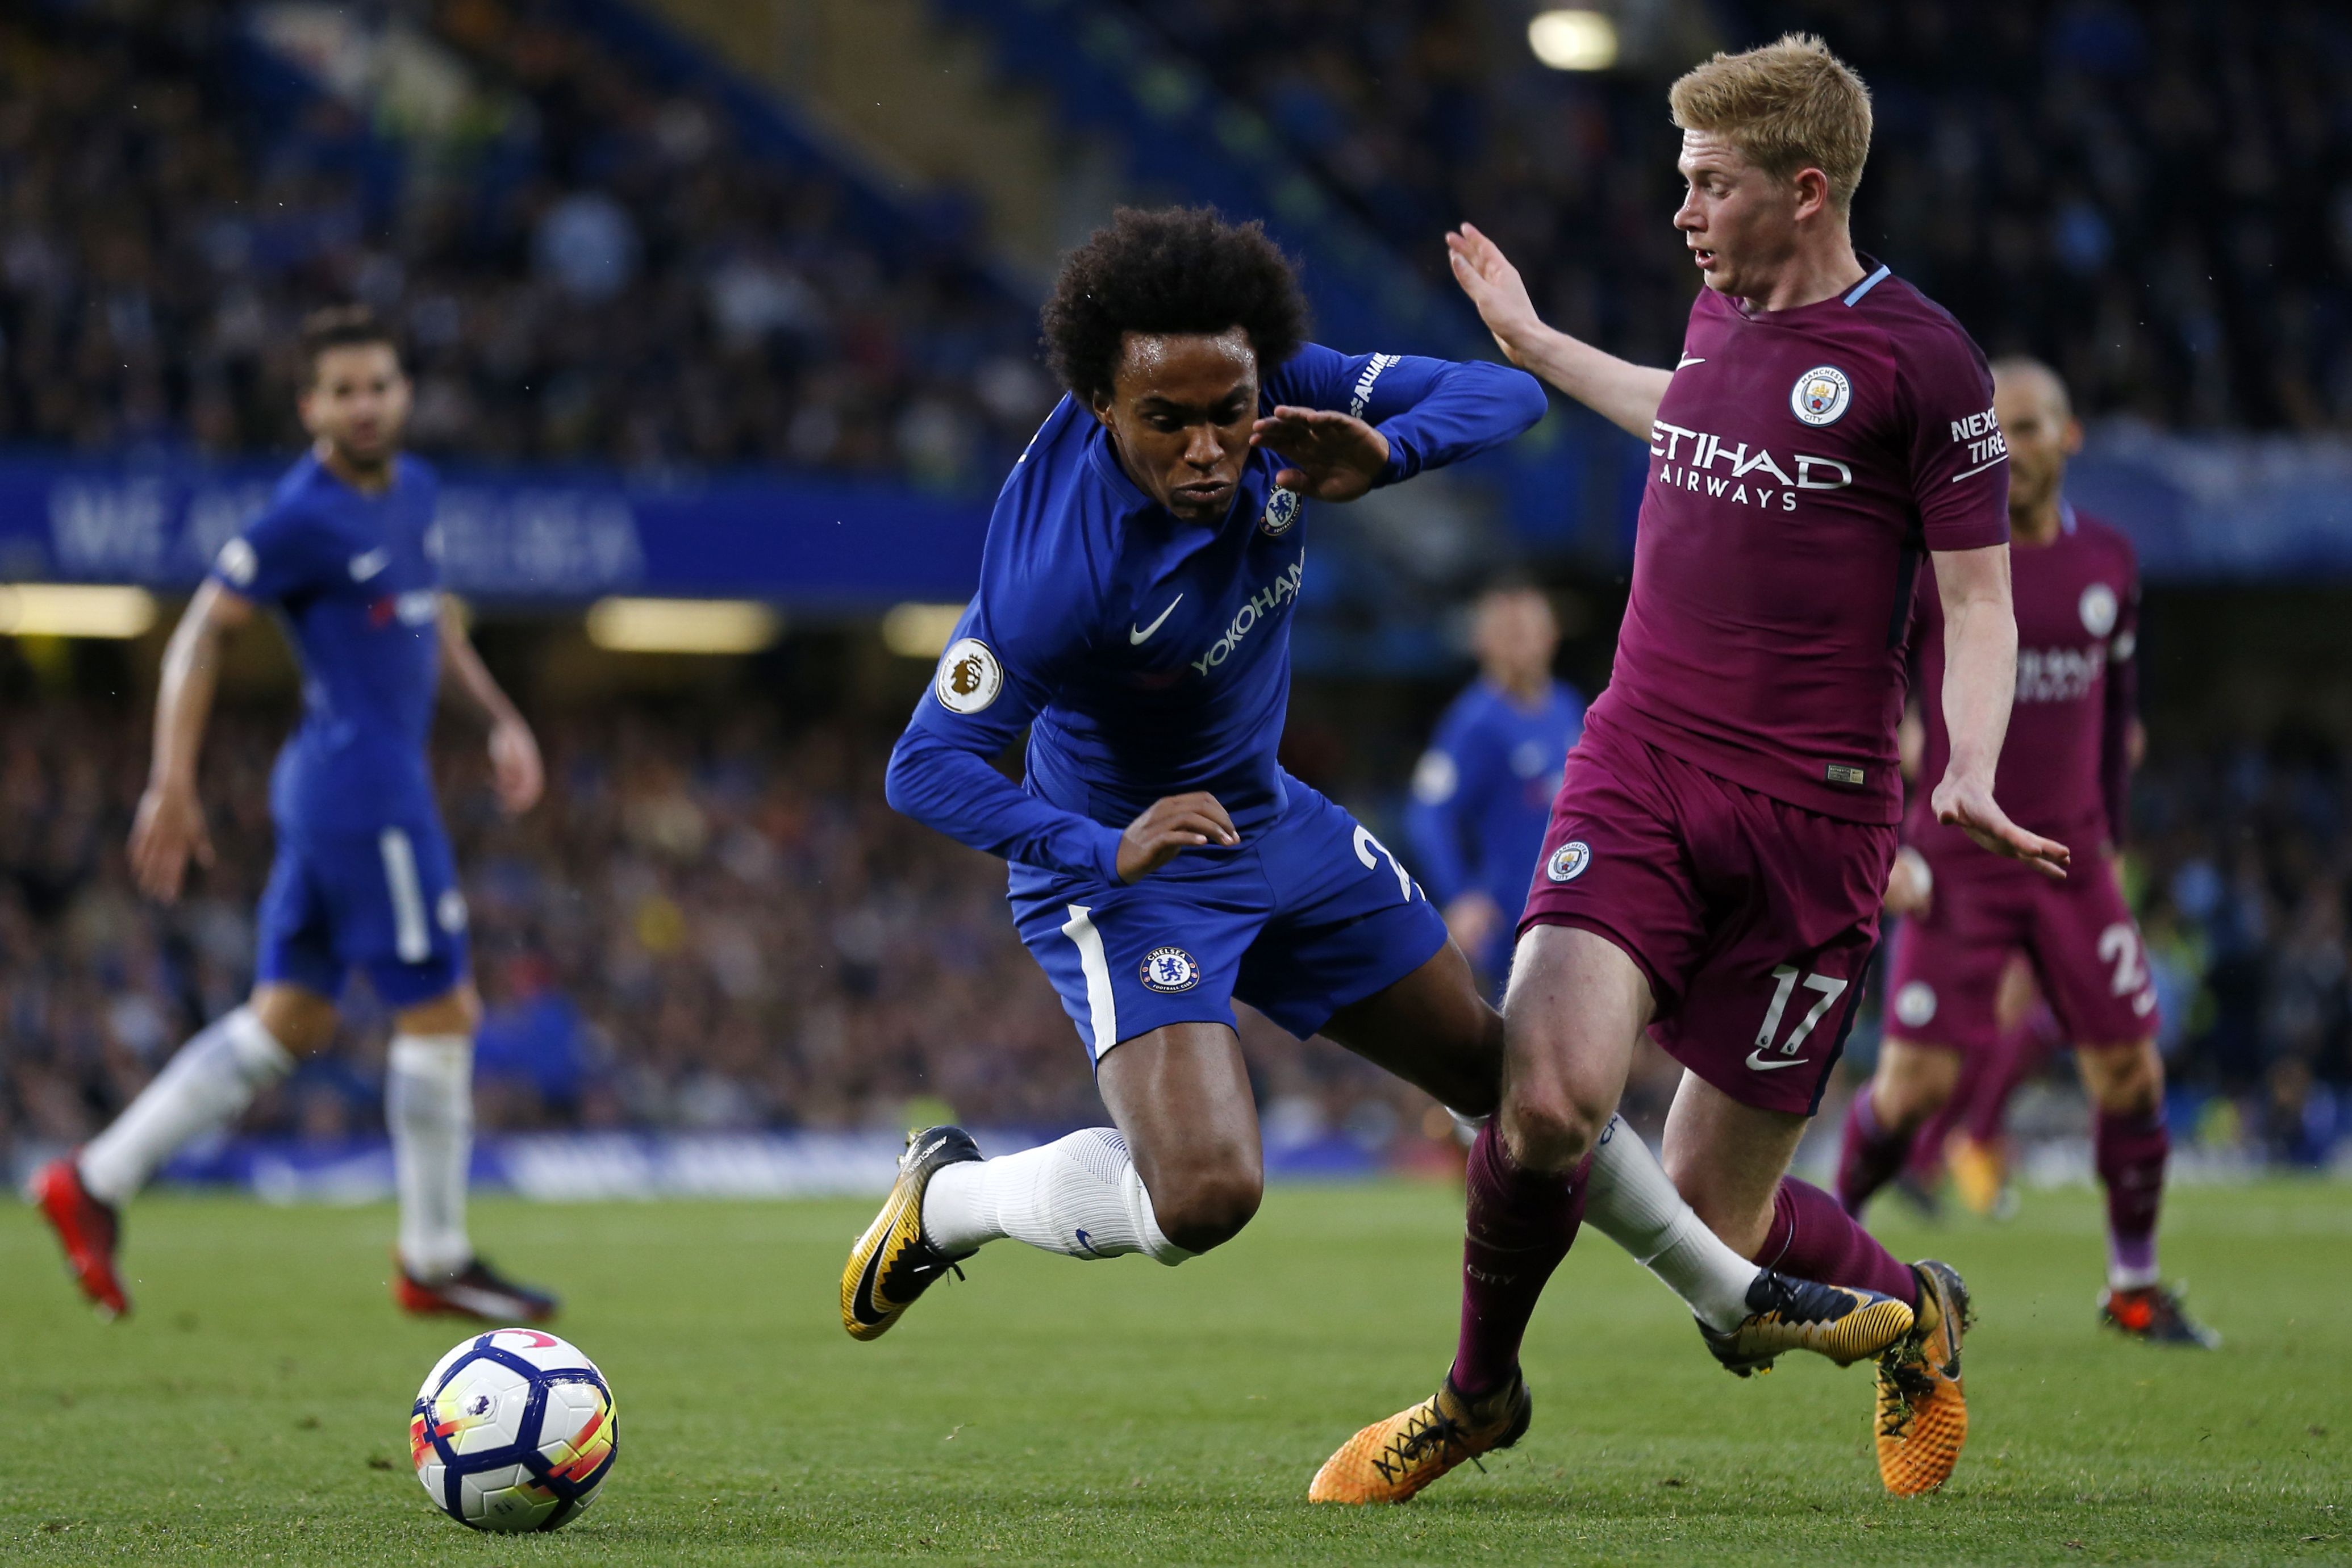 Chelsea's Brazilian midfielder Willian (C) vies with Manchester City's Belgian midfielder Kevin De Bruyne (R) during the English Premier League football match between Chelsea and Manchester City at Stamford Bridge in London on September 30, 2017. / AFP PHOTO / Ian KINGTON / RESTRICTED TO EDITORIAL USE. No use with unauthorized audio, video, data, fixture lists, club/league logos or 'live' services. Online in-match use limited to 75 images, no video emulation. No use in betting, games or single club/league/player publications.  /         (Photo credit should read IAN KINGTON/AFP/Getty Images)